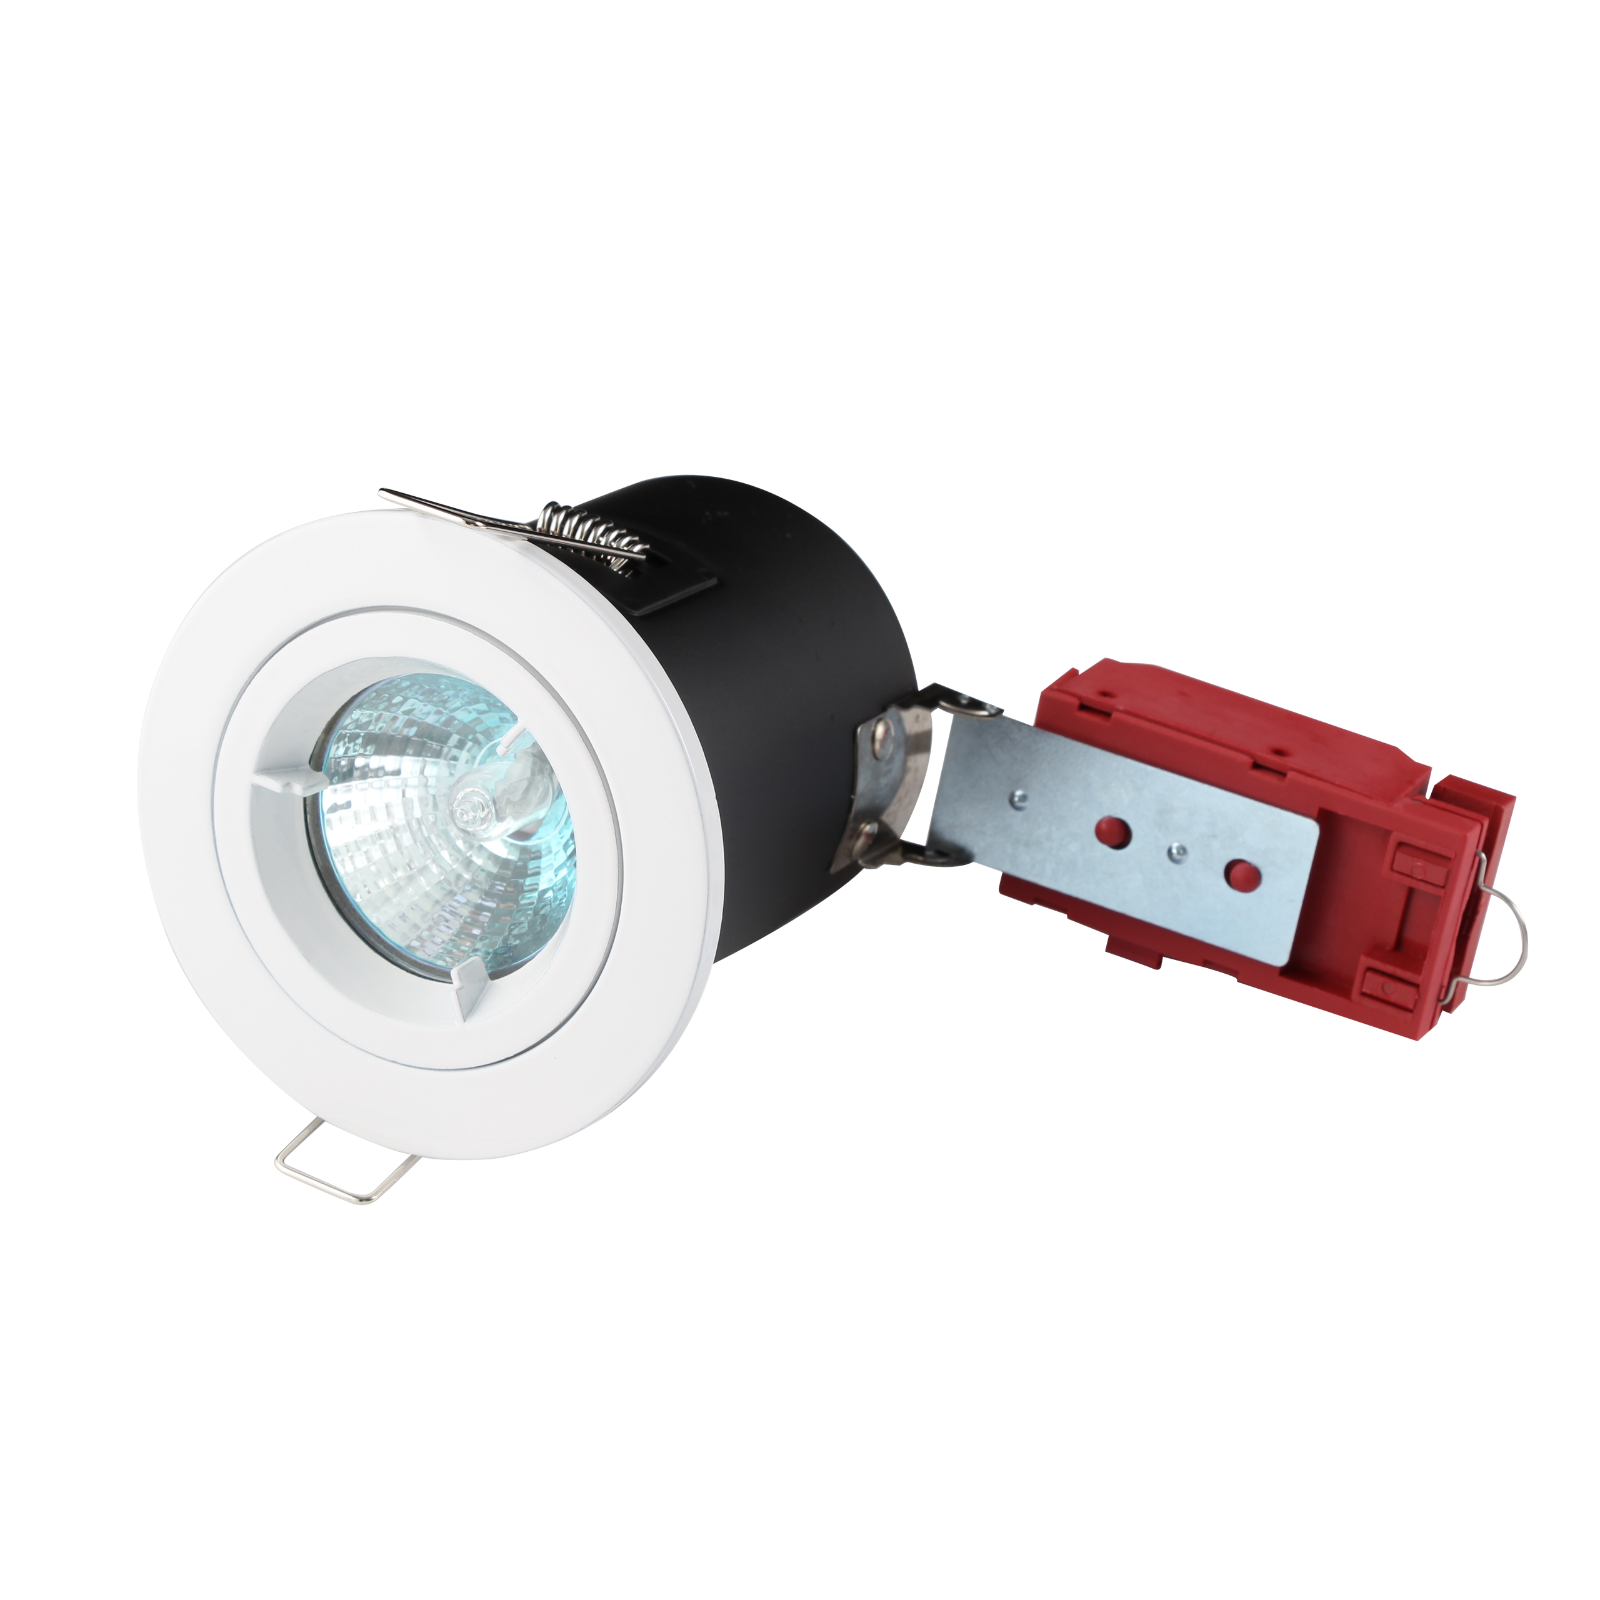 Fire-Rated Die-Cast LV Downlight 50mm White - VFRCL02W 